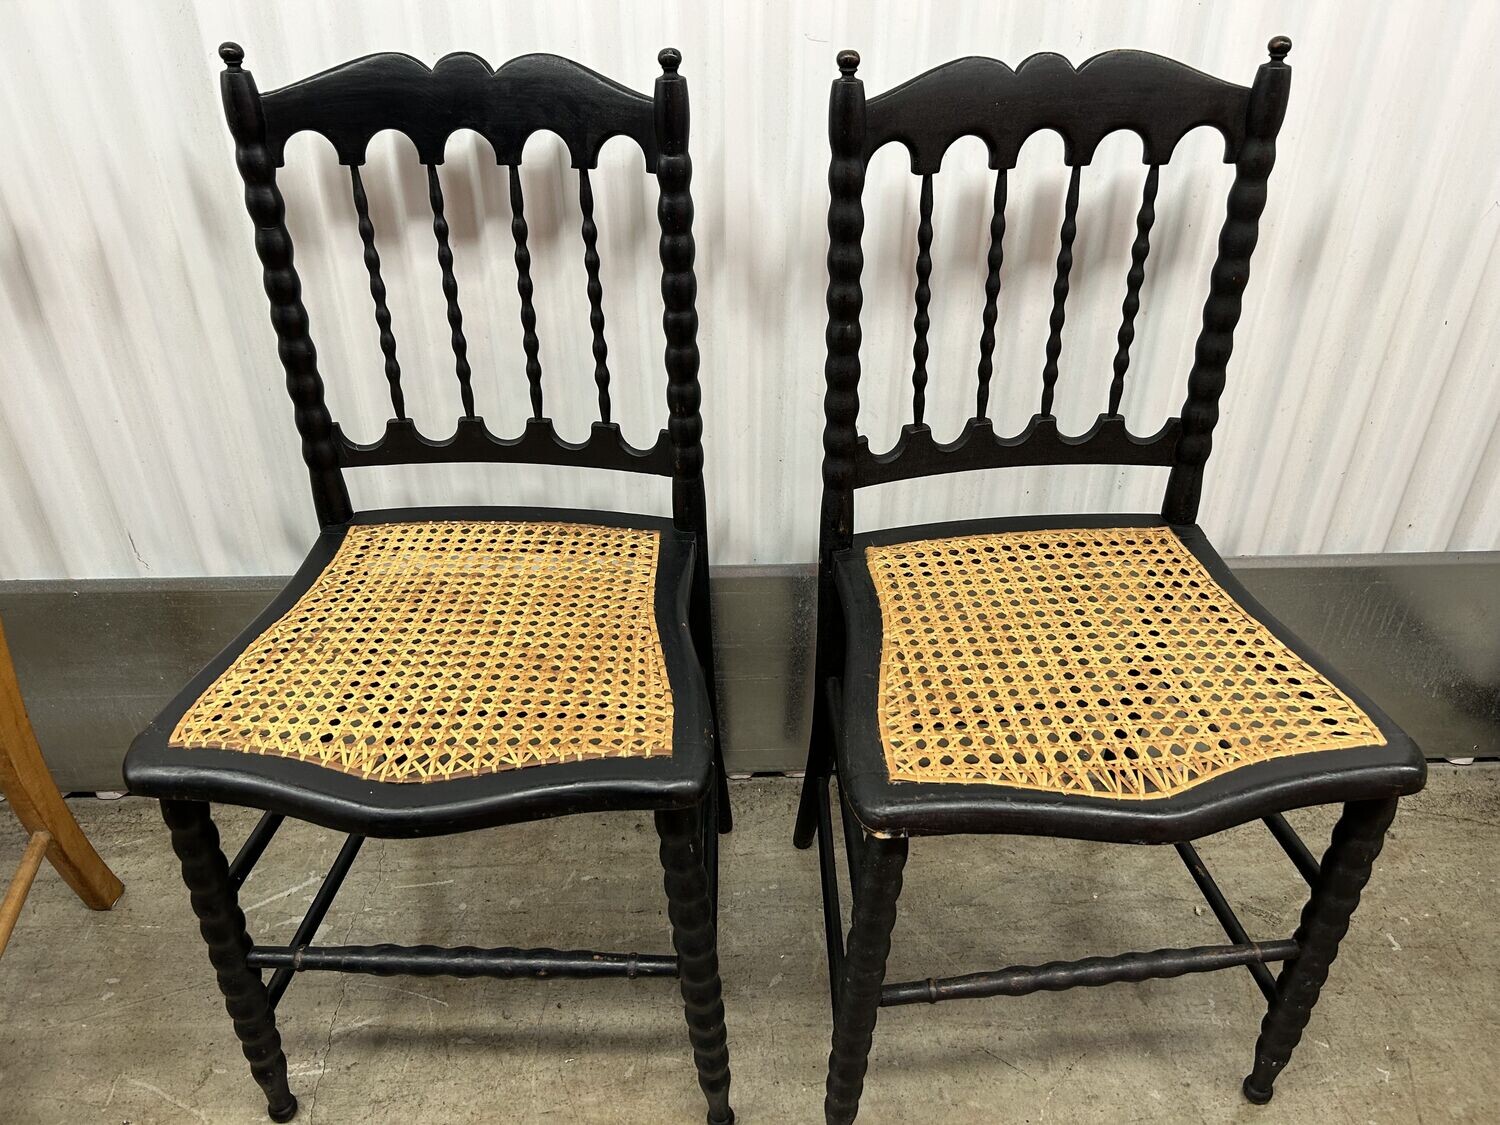 ** Pair of Black (painted) Antique Chairs, caned seats #2125 ** 3 wks. to sell, full price